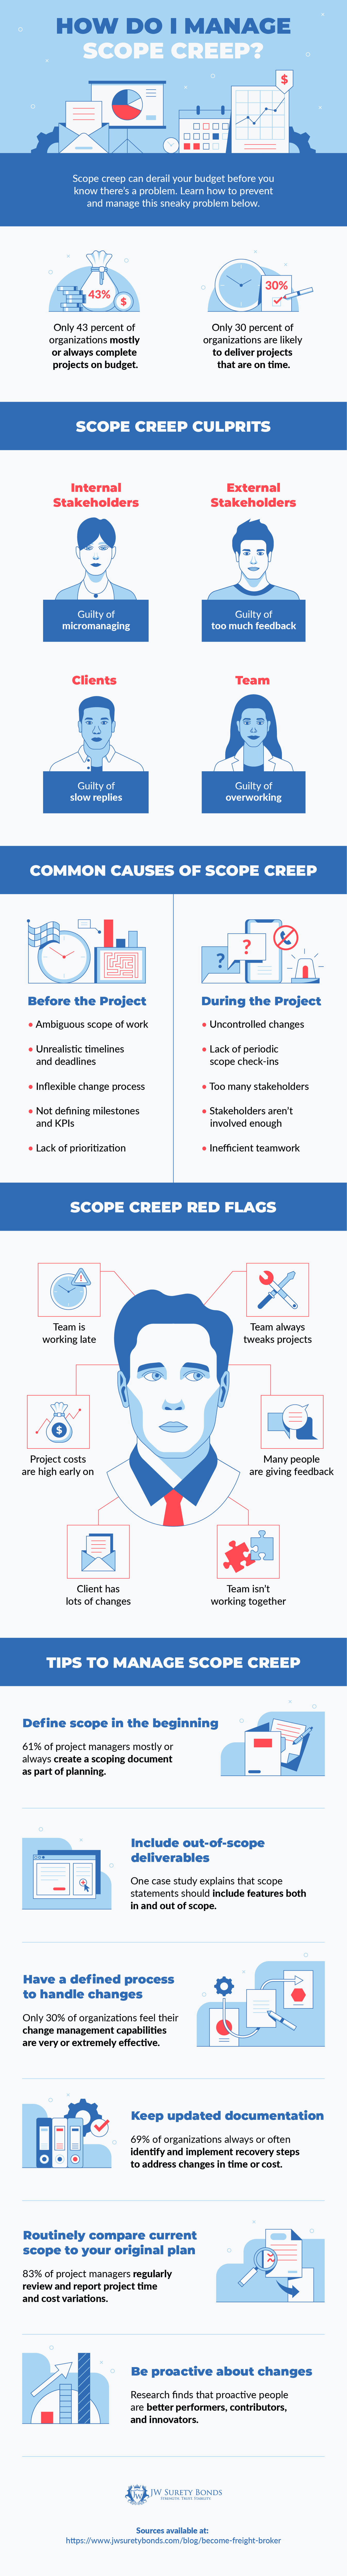 how to manage scope creep infographic